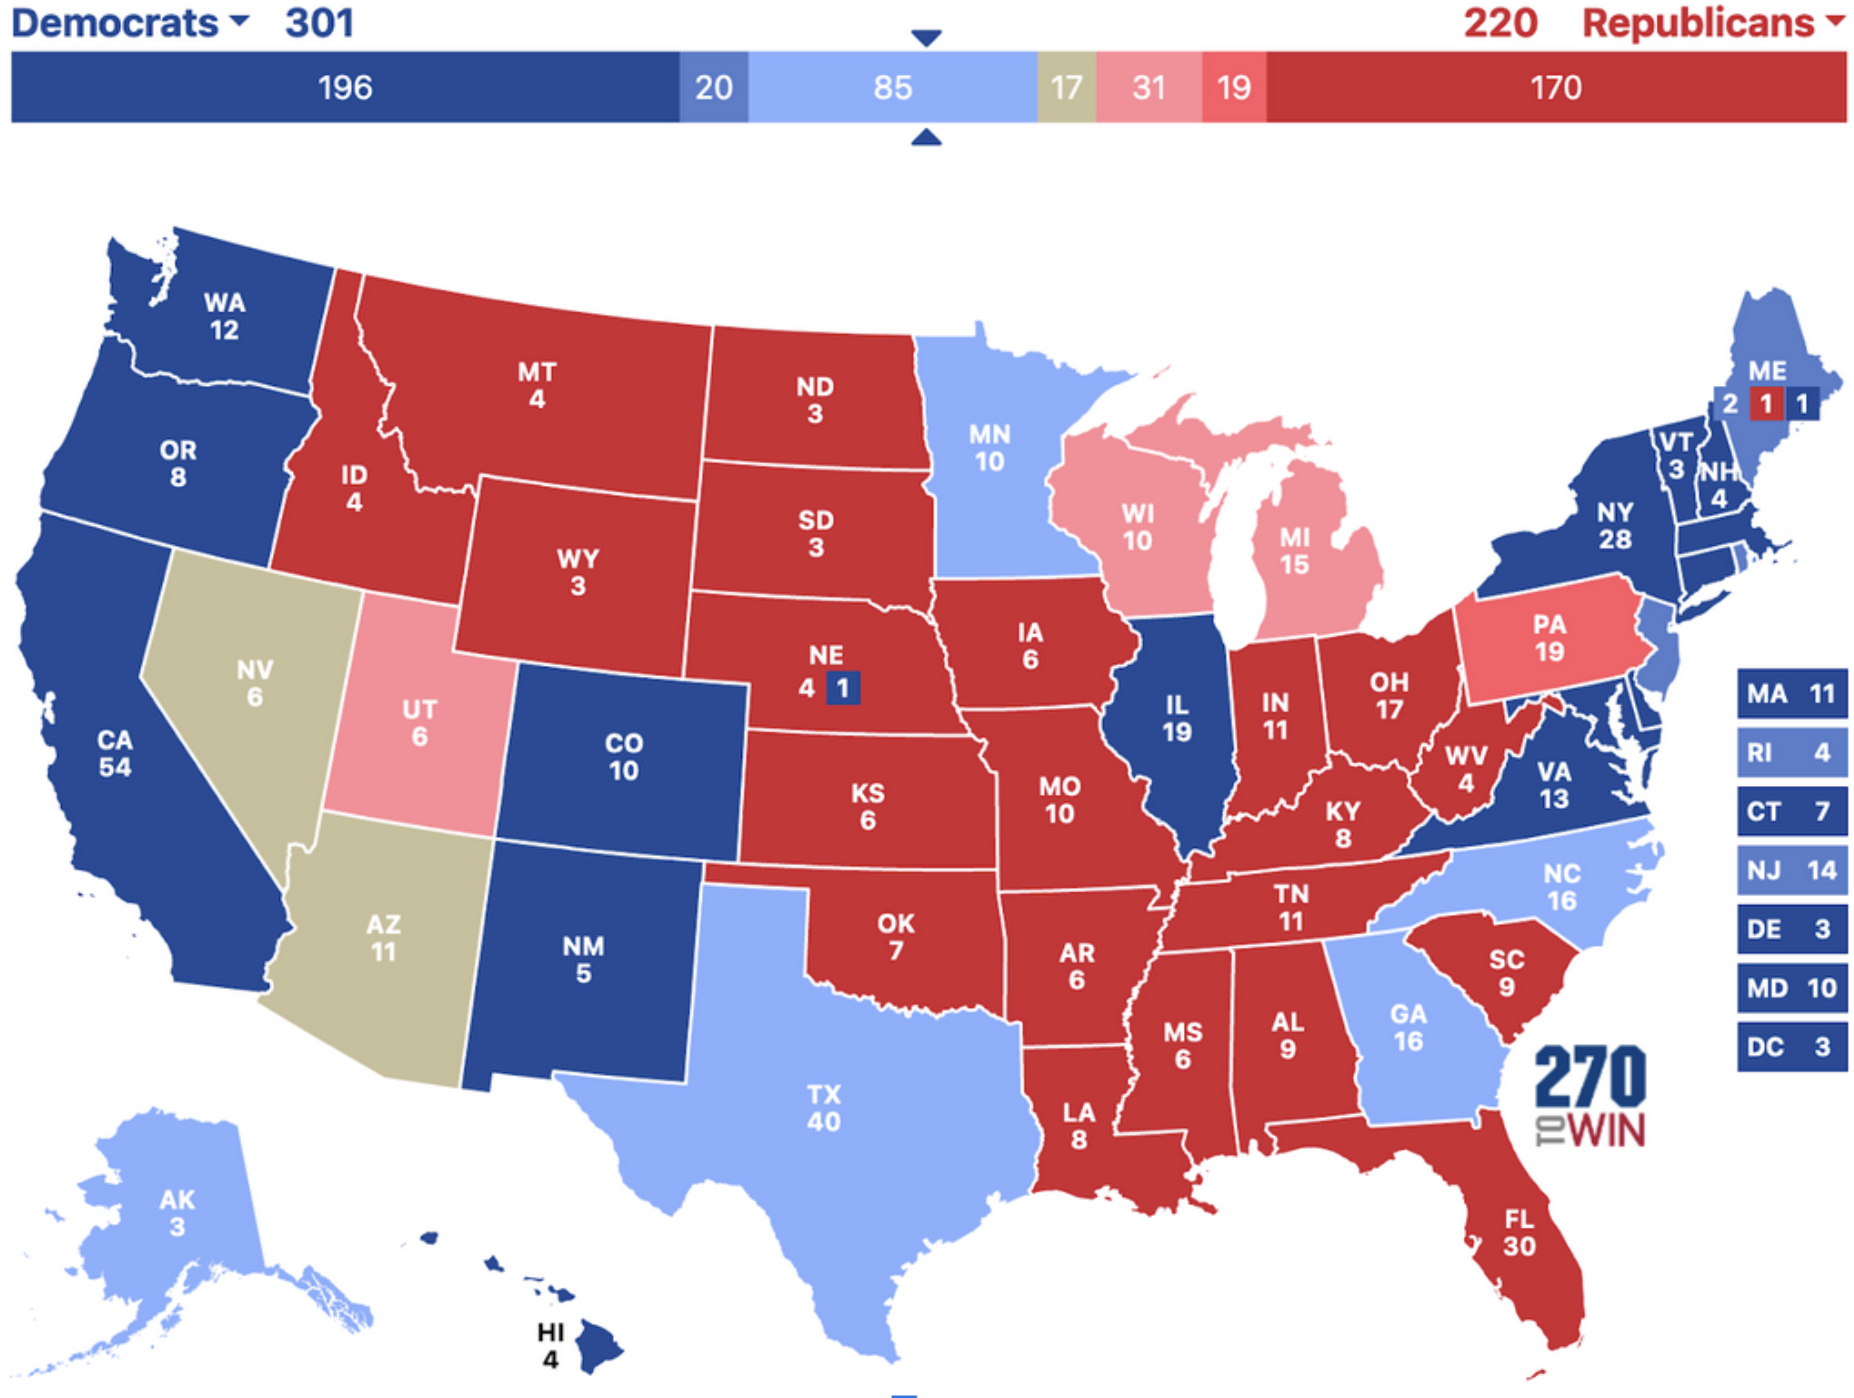 a map of the Electoral College with 301 blue votes and 220 red votes